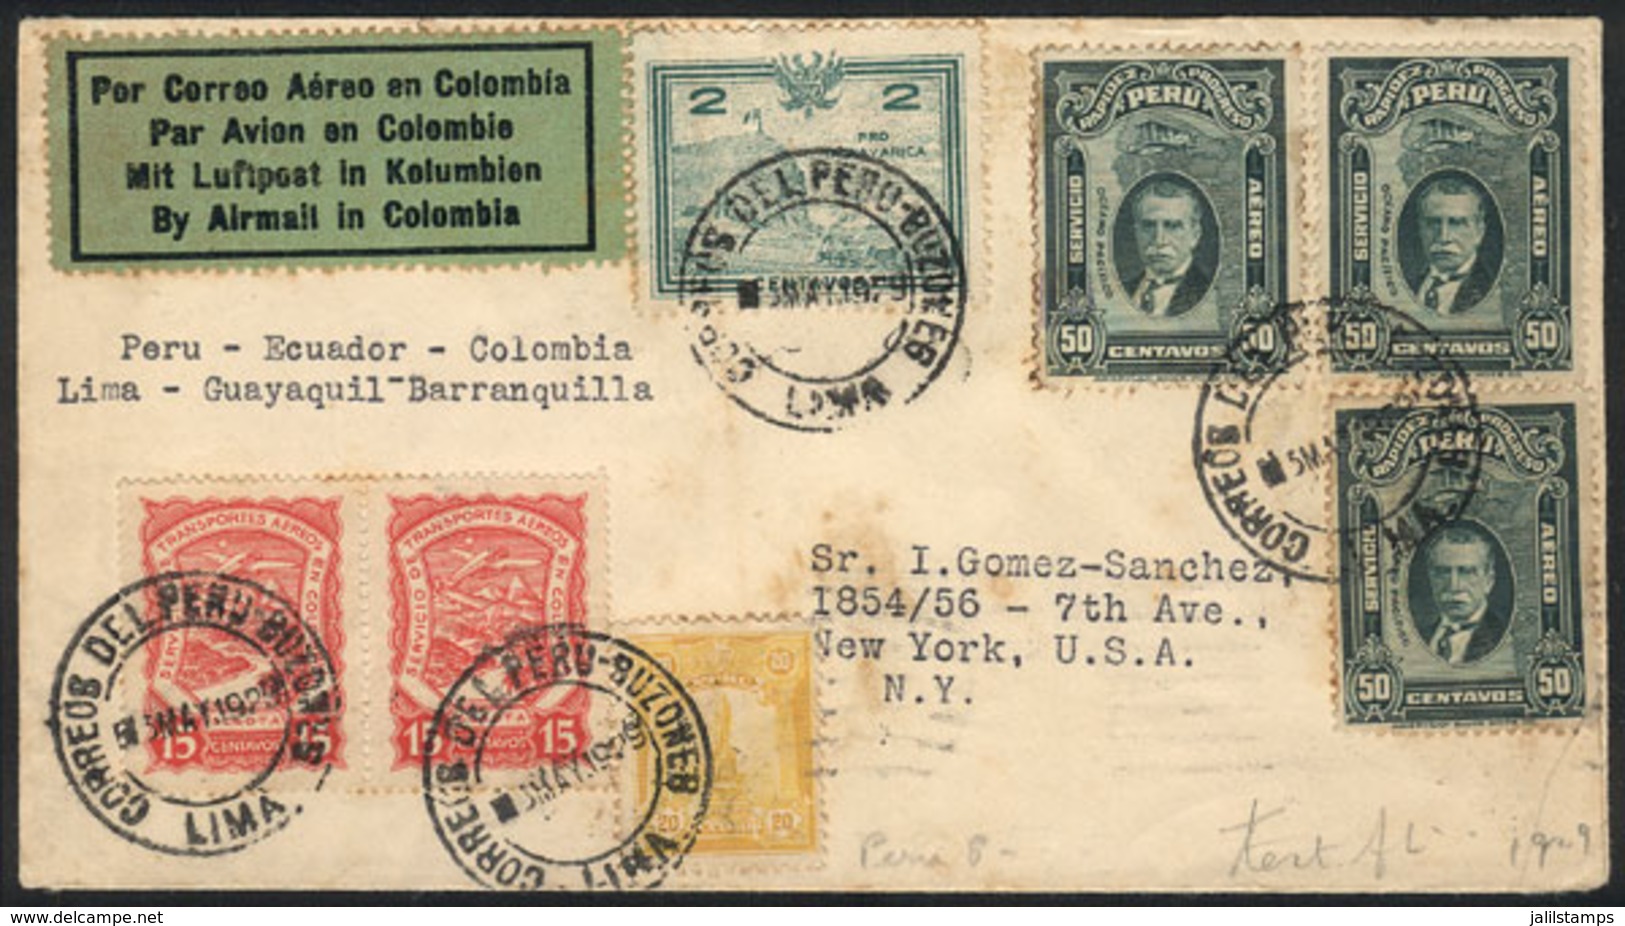 PERU: 3/MAY/1929 Lima - New York, Test Flight Lima - Cristobal (Panama Canal), Cover With Mixed Postage Of Peru And Colo - Perú